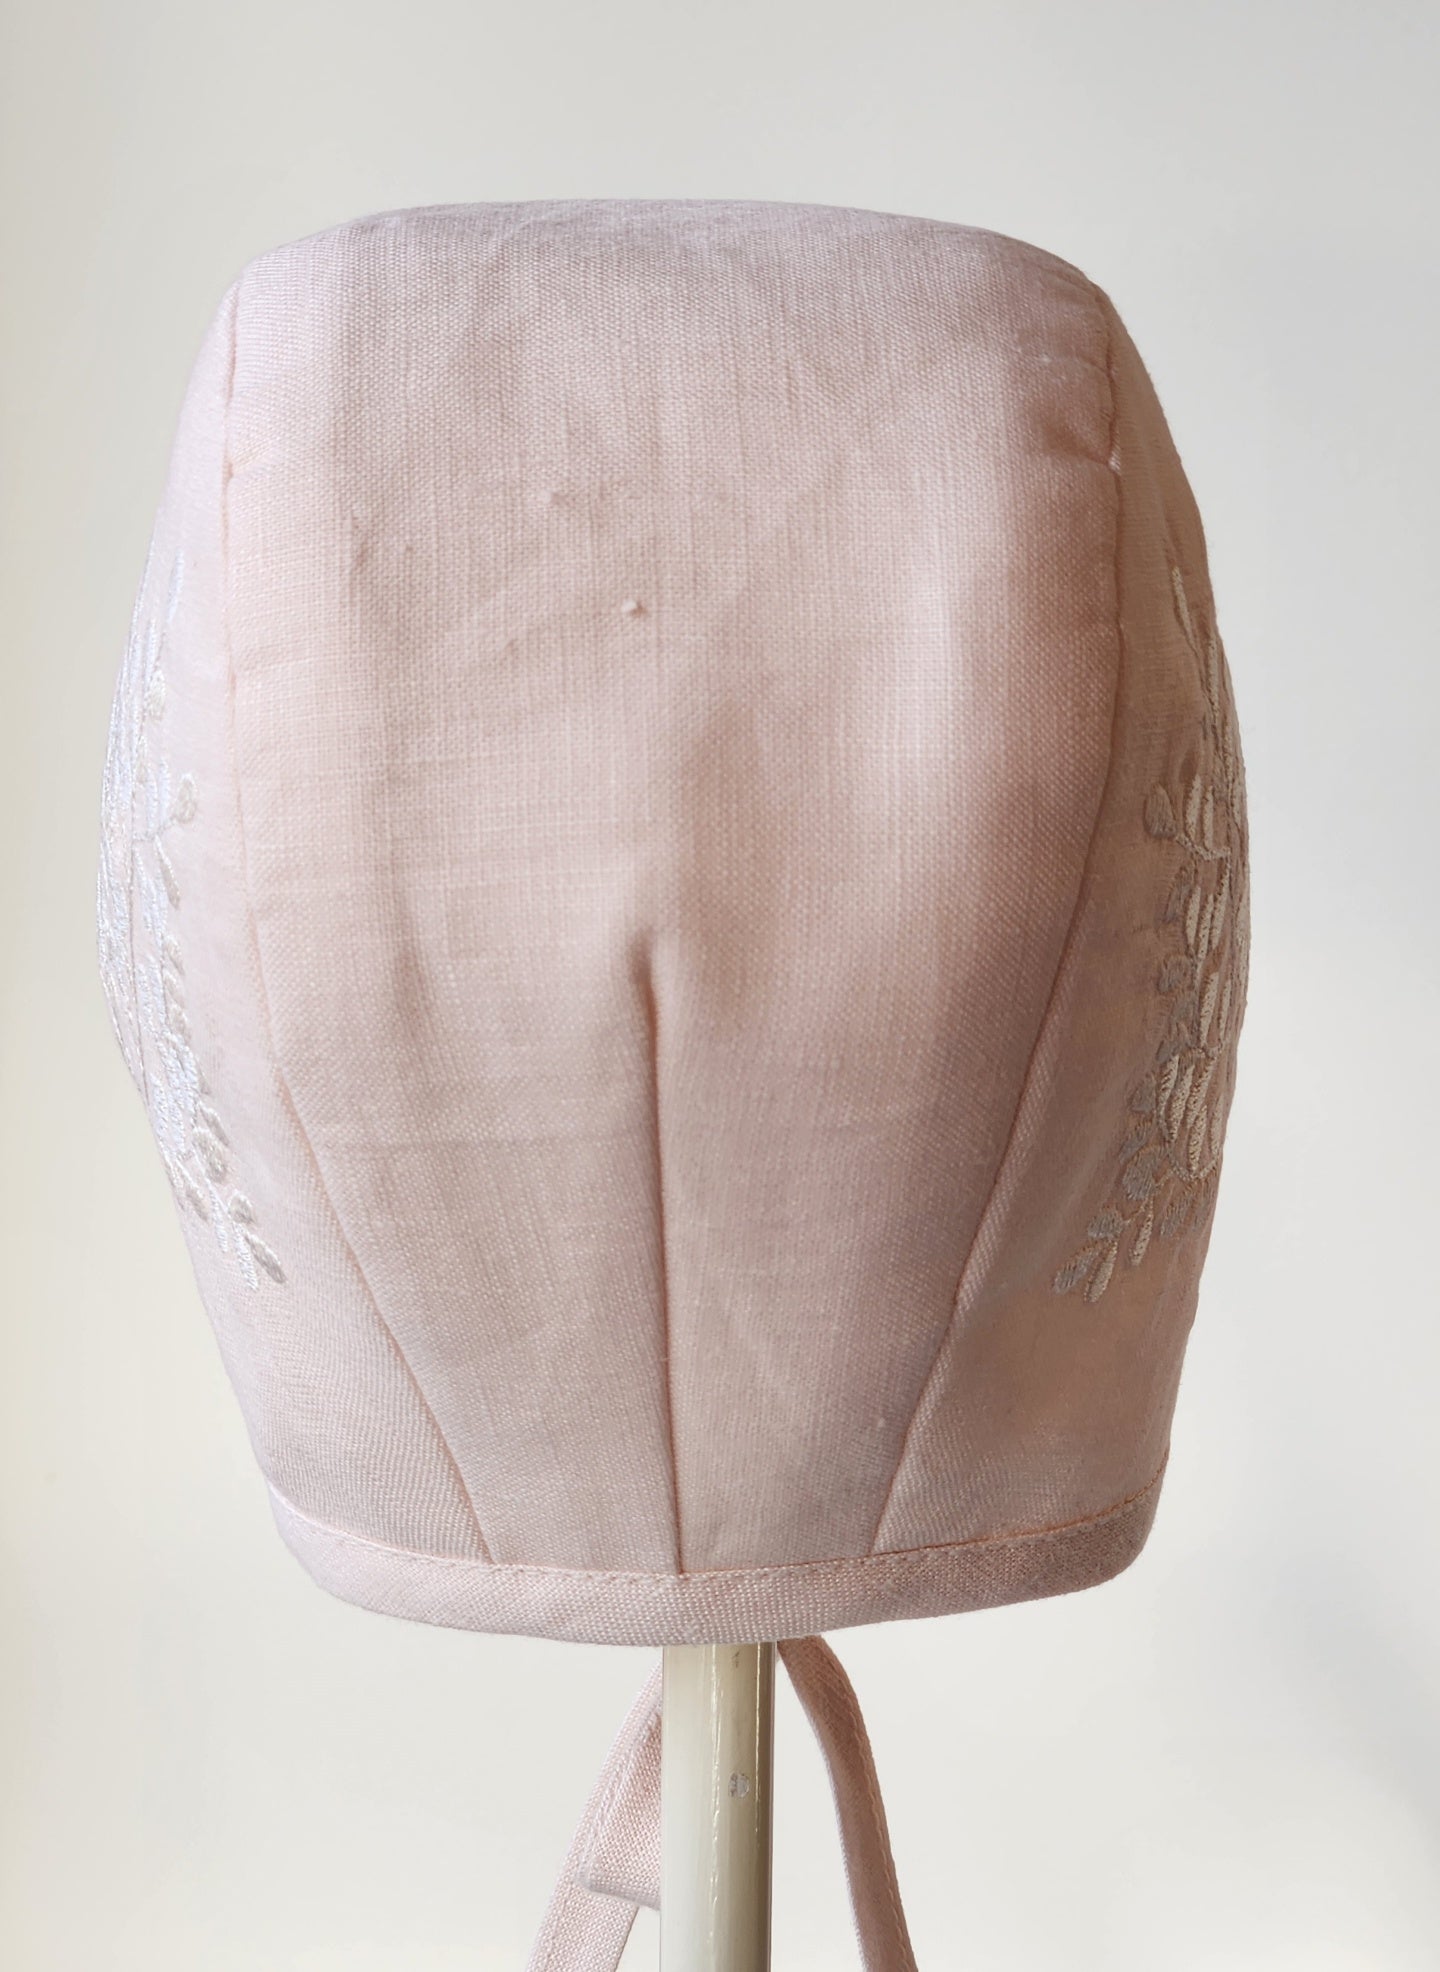 Exclusive Linen Bonnet, Palest Pink Linen Cap Style Bonnet with Ivory embroidered branch